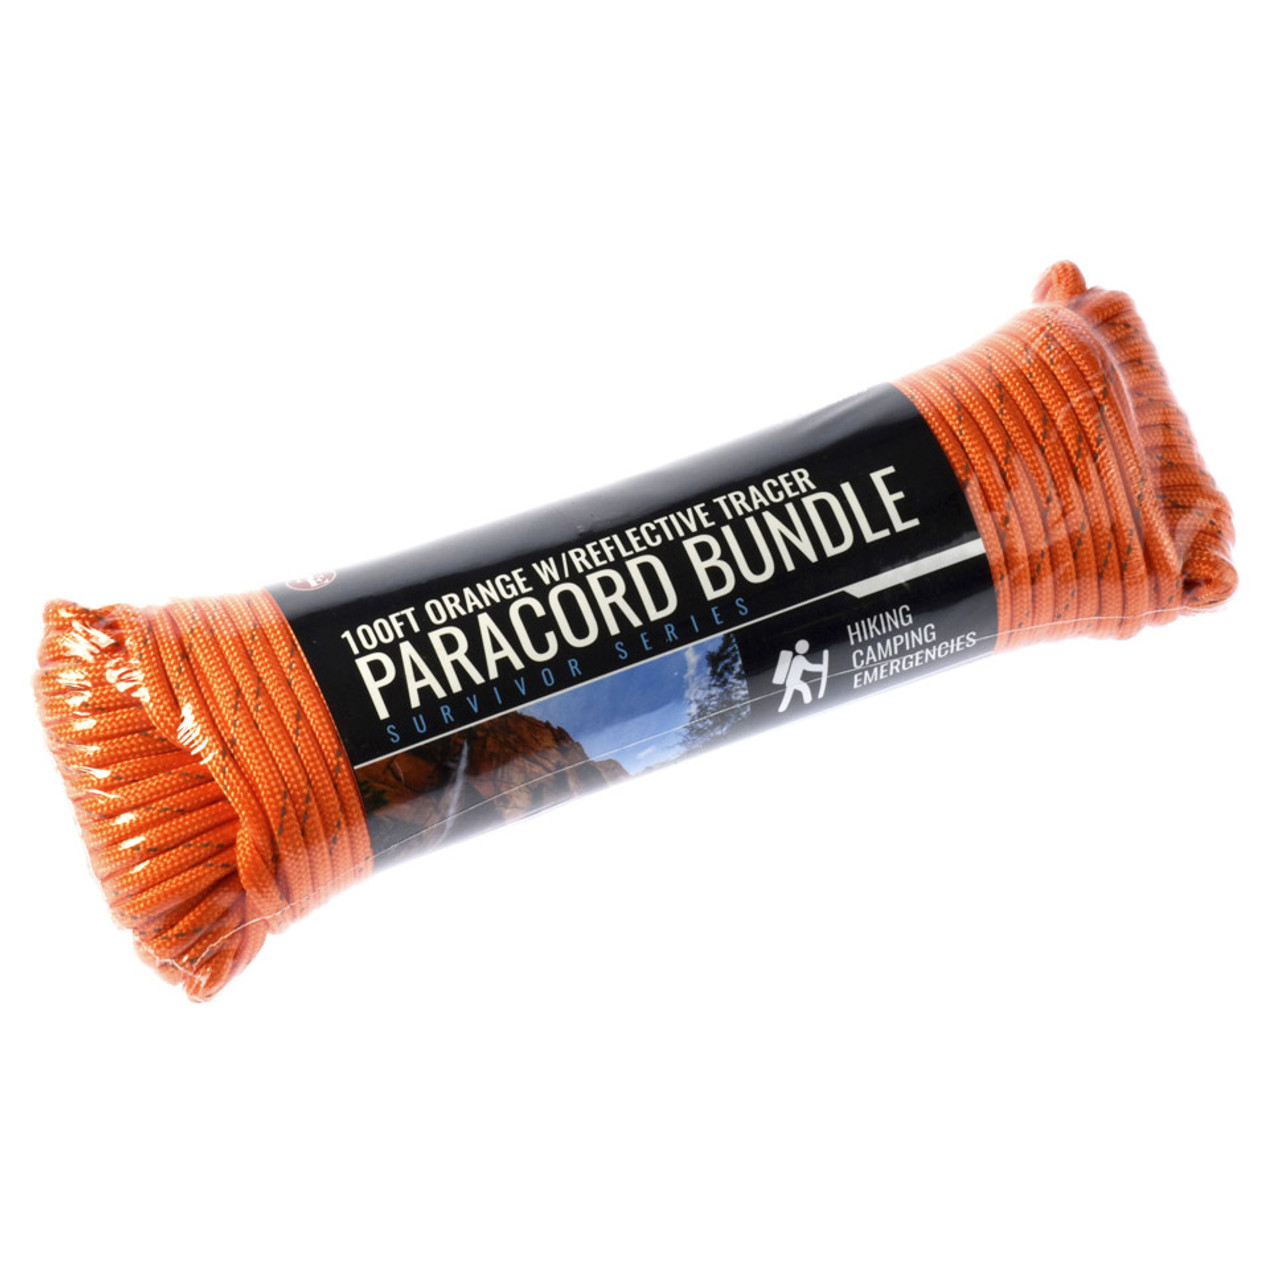 https://cdn11.bigcommerce.com/s-tumf4kk1l4/images/stencil/1280x1280/products/3848/7093/100-ft-bundle-orange-paracord-with-reflective-tracer-5-32-dia-14__79599.1640717141.jpg?c=1?imbypass=on